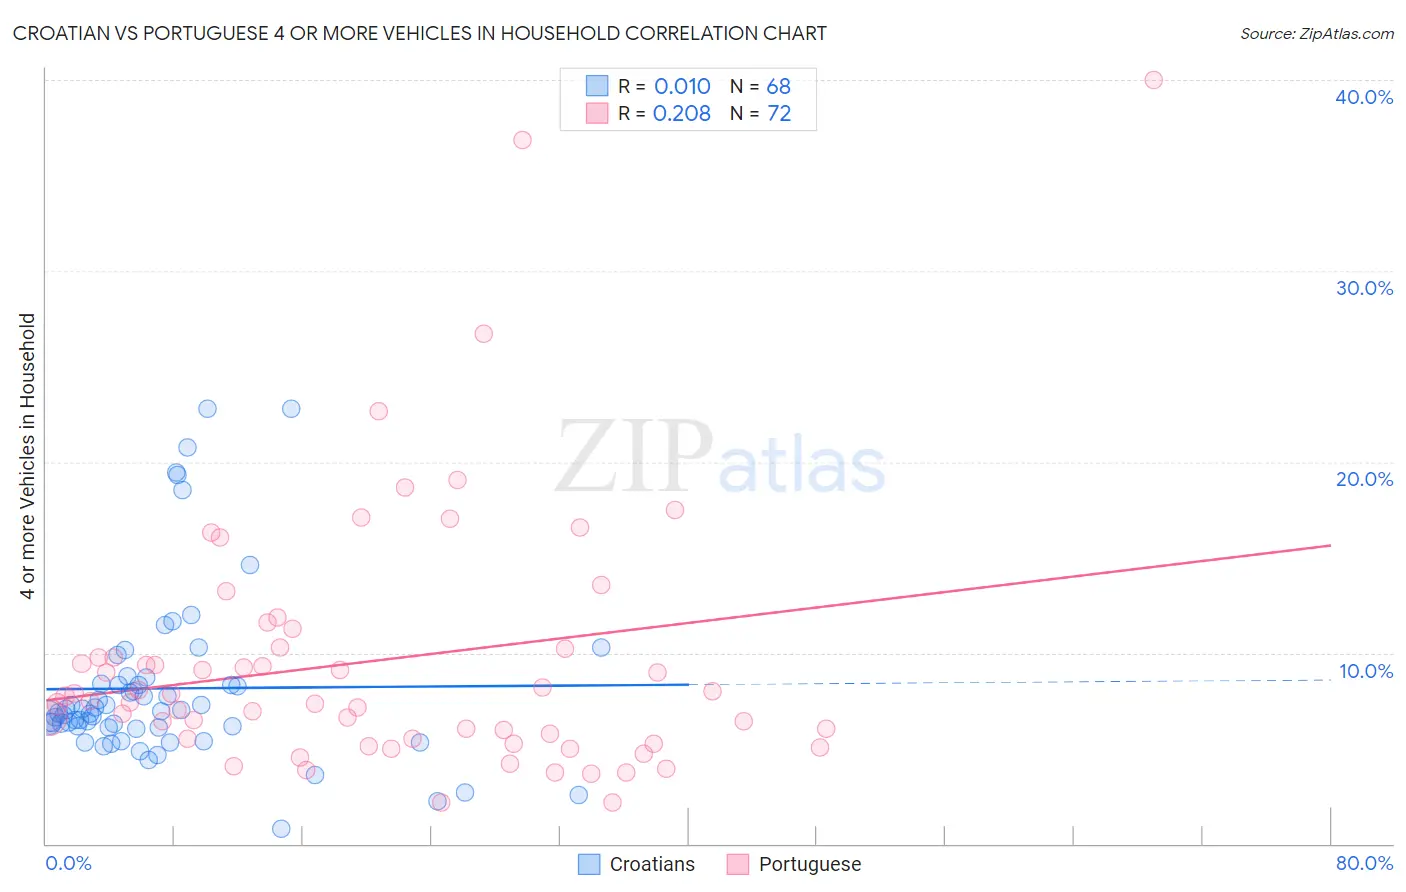 Croatian vs Portuguese 4 or more Vehicles in Household